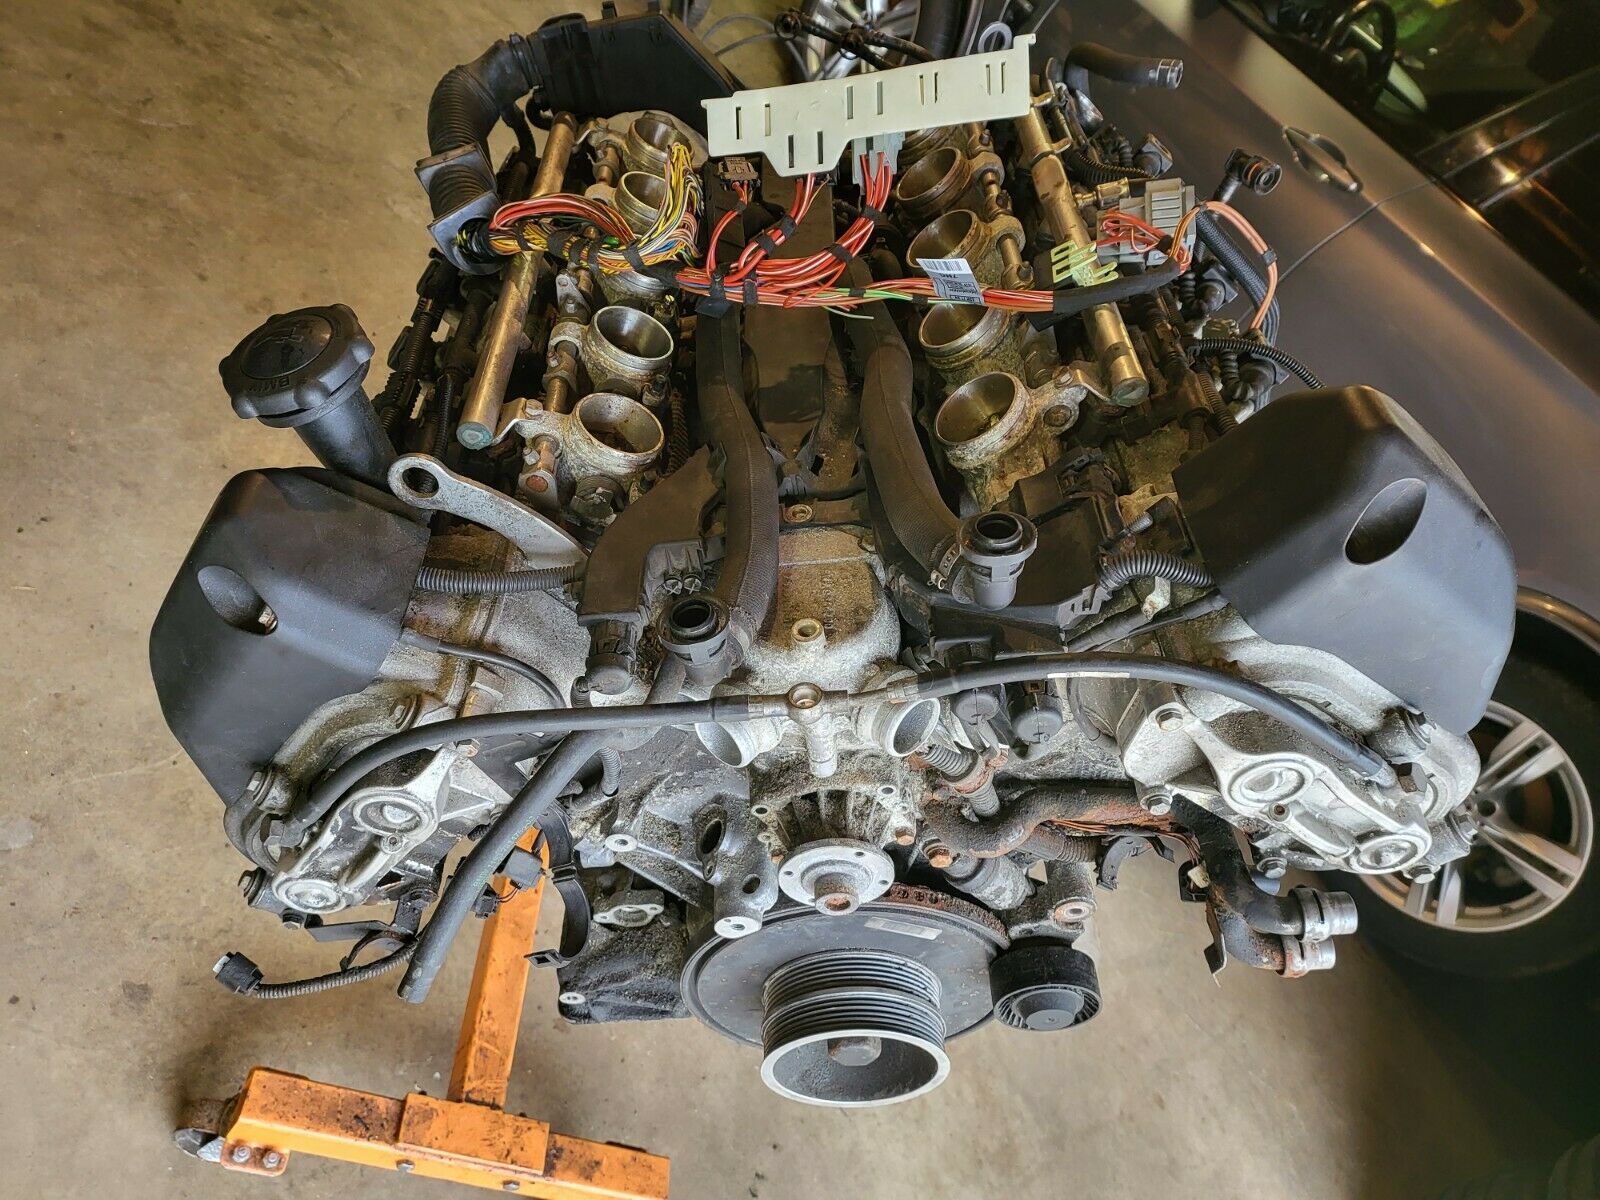 Buy This 5.0L V10 E60 BMW M5 Engine, It's Much Cheaper Than You